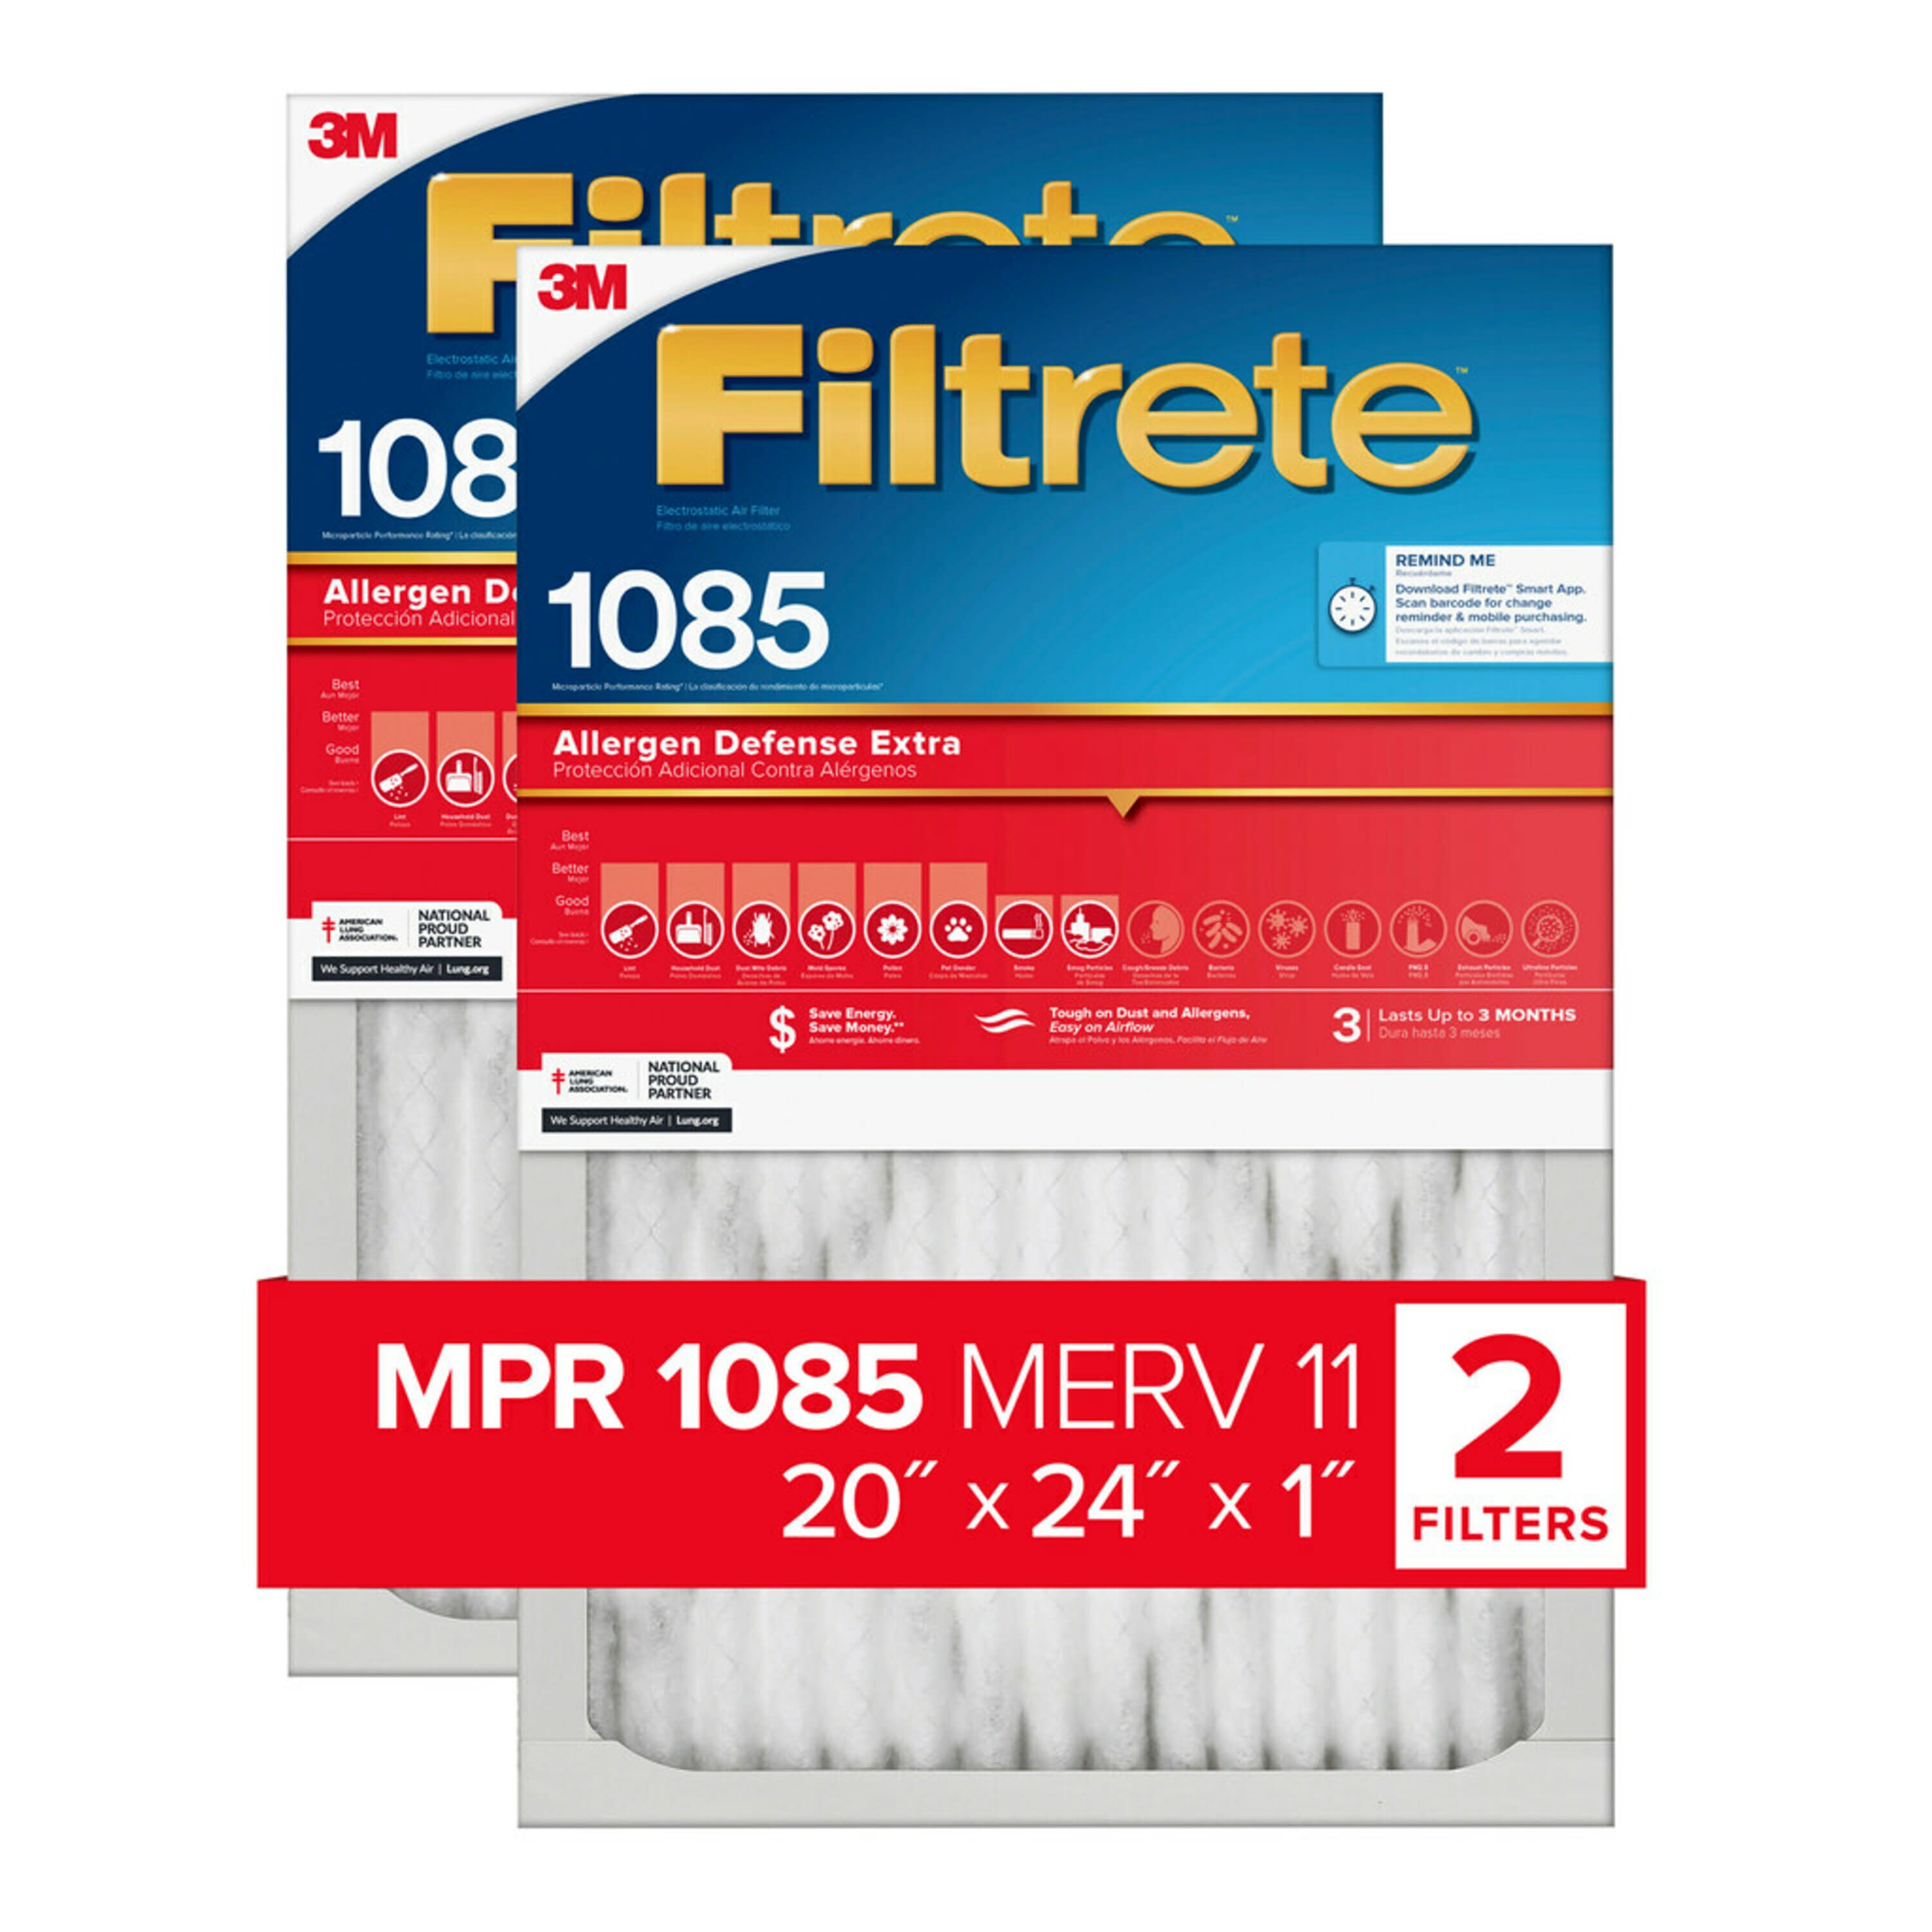 3M Filtrete Room Air Conditioner Filter 15 " X 24 " X 1/8 " Package quantity 1